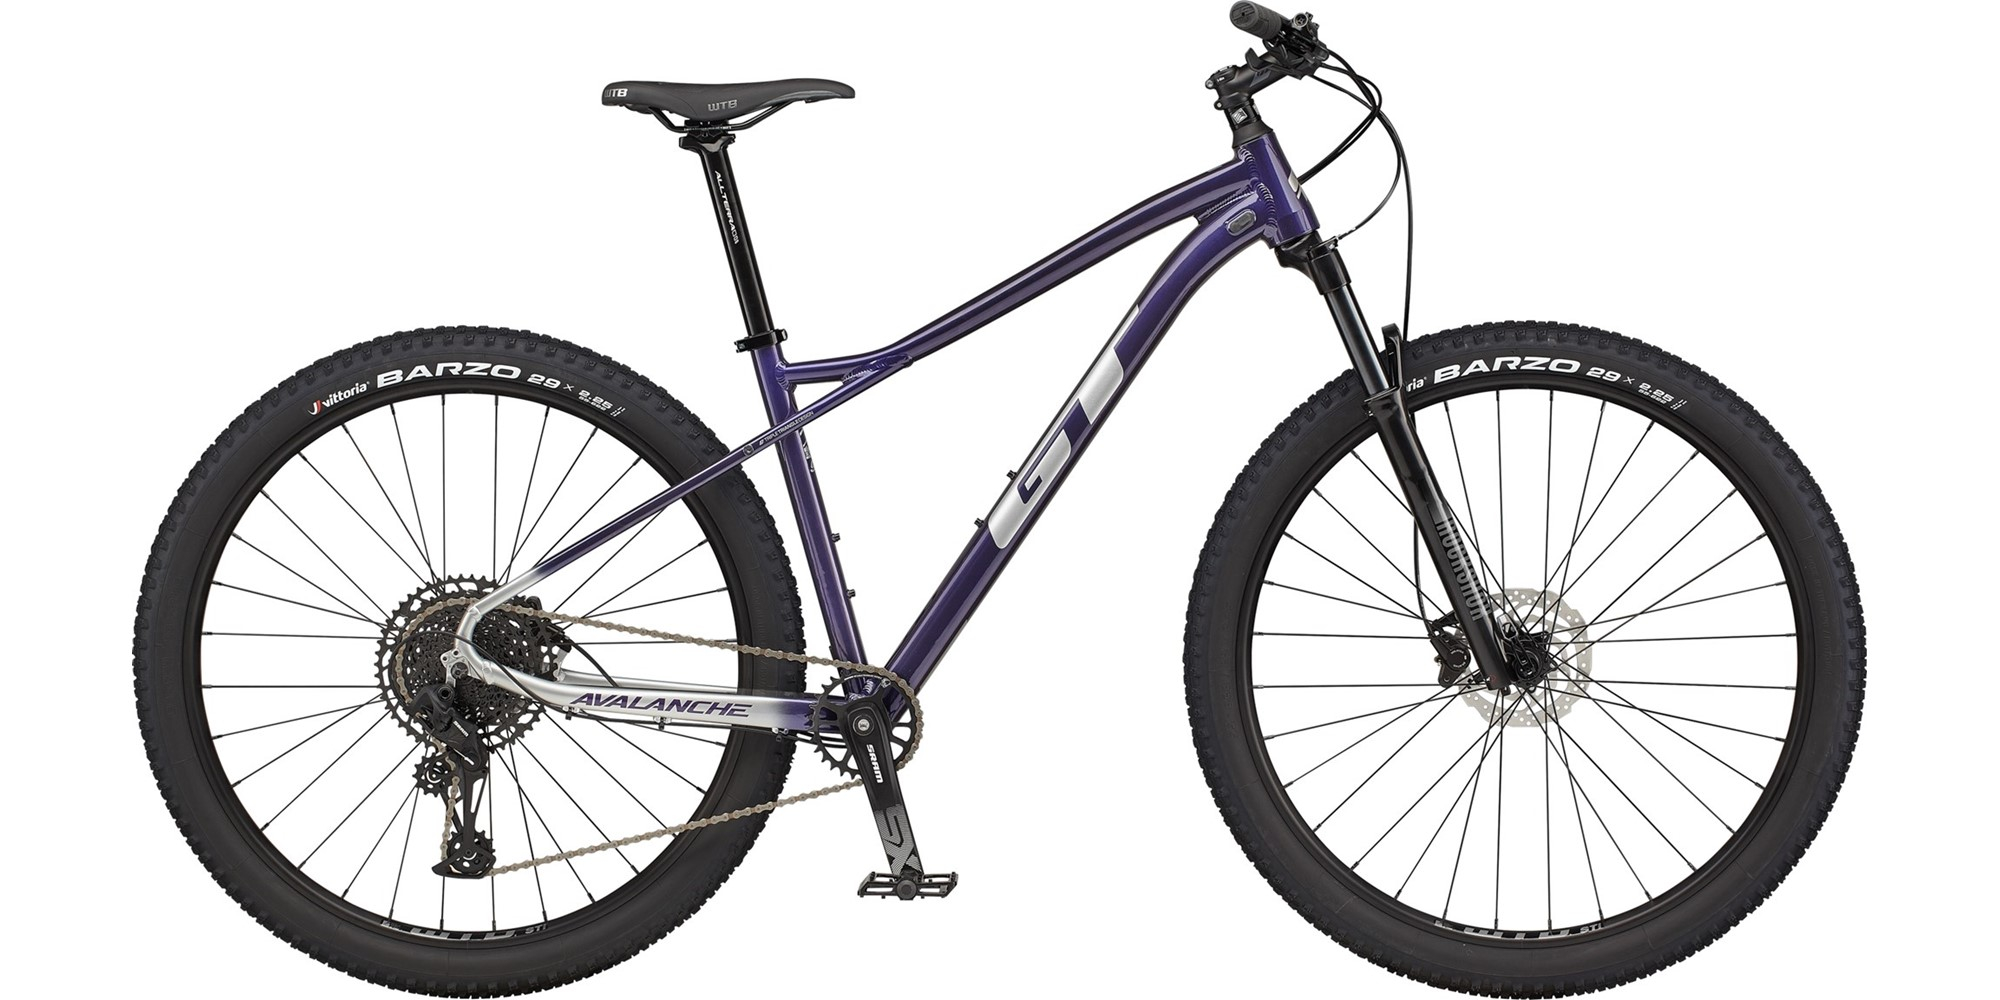 Cycles UK GT 2021  Avalanche Expert Hardtail Mountain Bike in Purple Medium